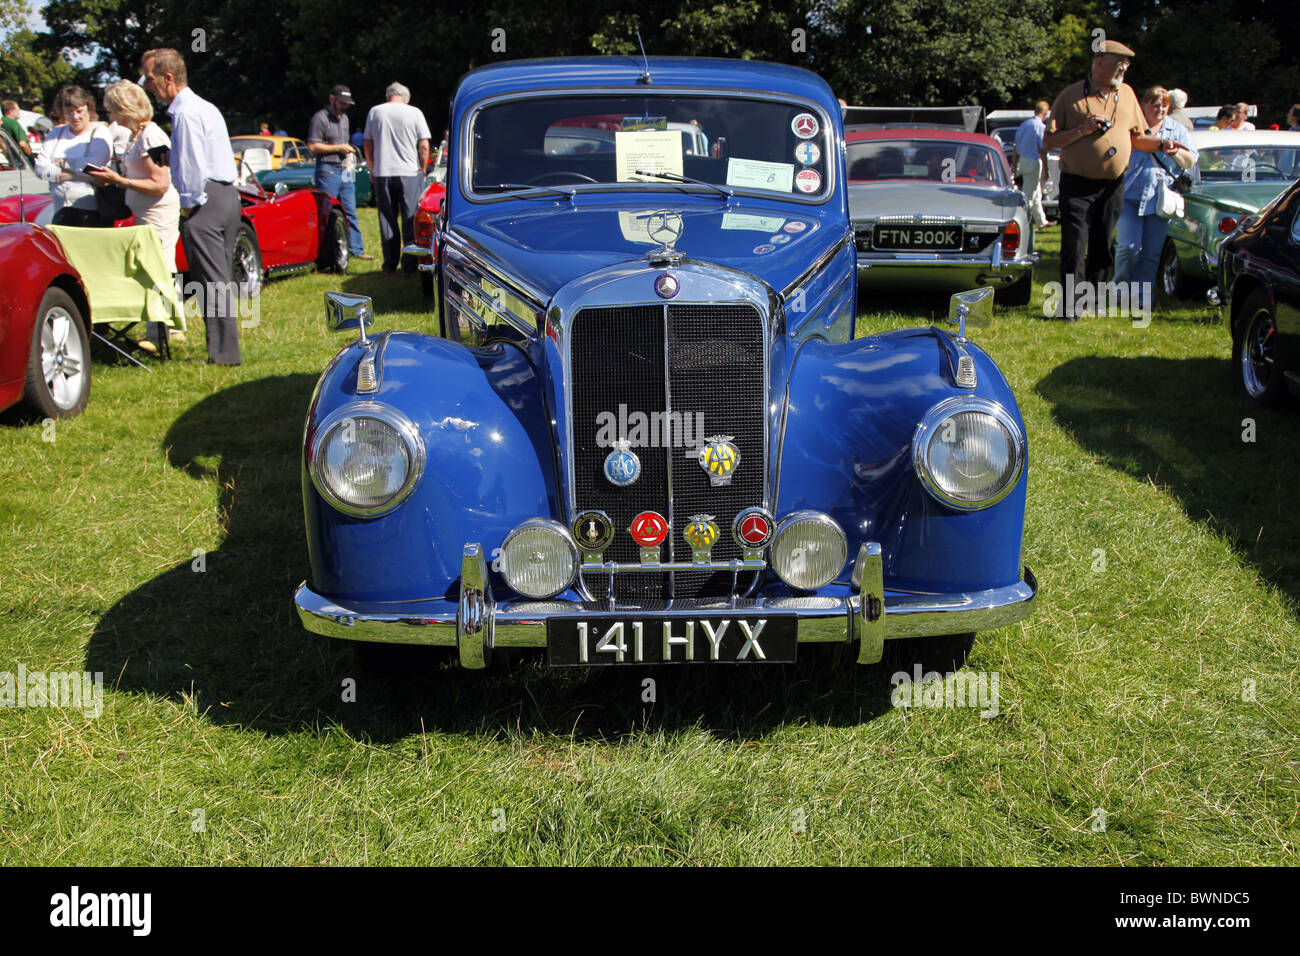 BLUE 1954 MERCEDES 220 SALOON STAINDROP YORKSHIRE RABY CASTLE STAINDROP NORTH YORKSHIRE STAINDROP NORTH YORKSHIRE 22 August 2 Stock Photo